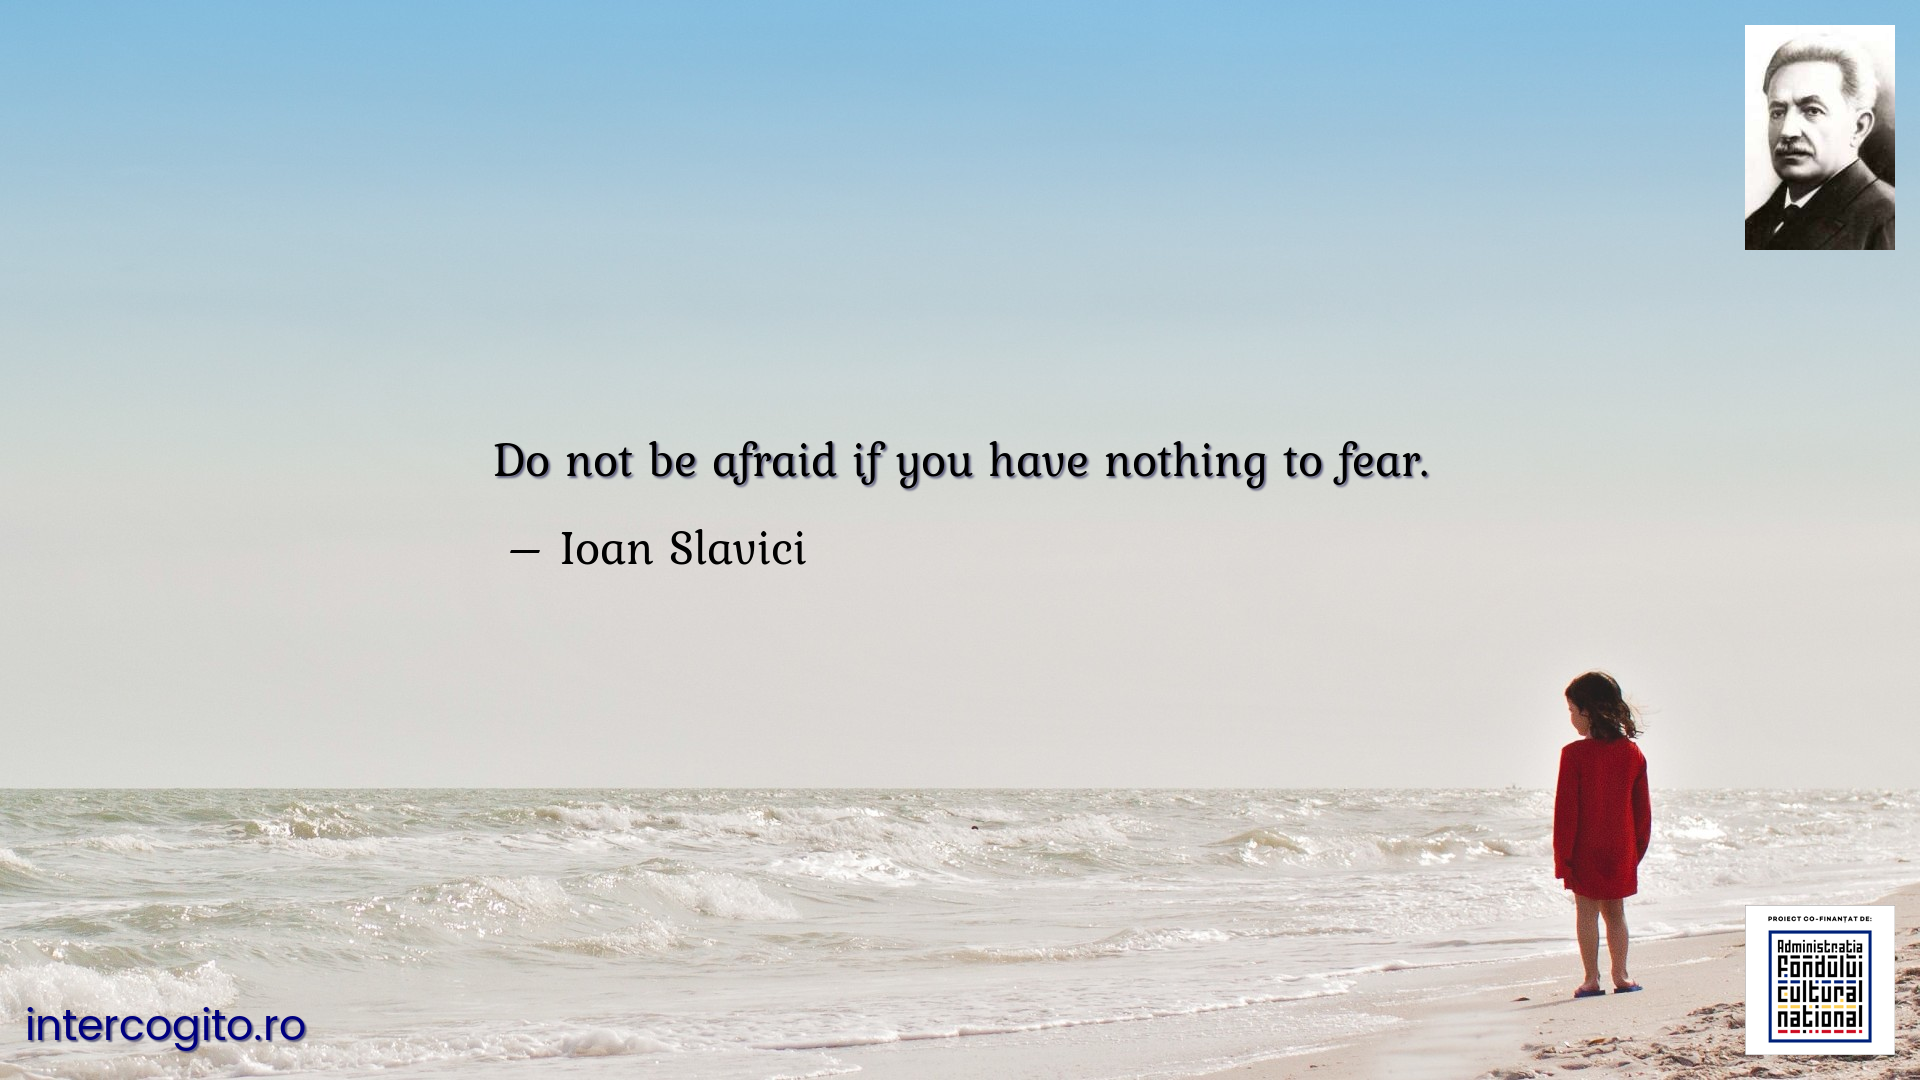 Do not be afraid if you have nothing to fear.